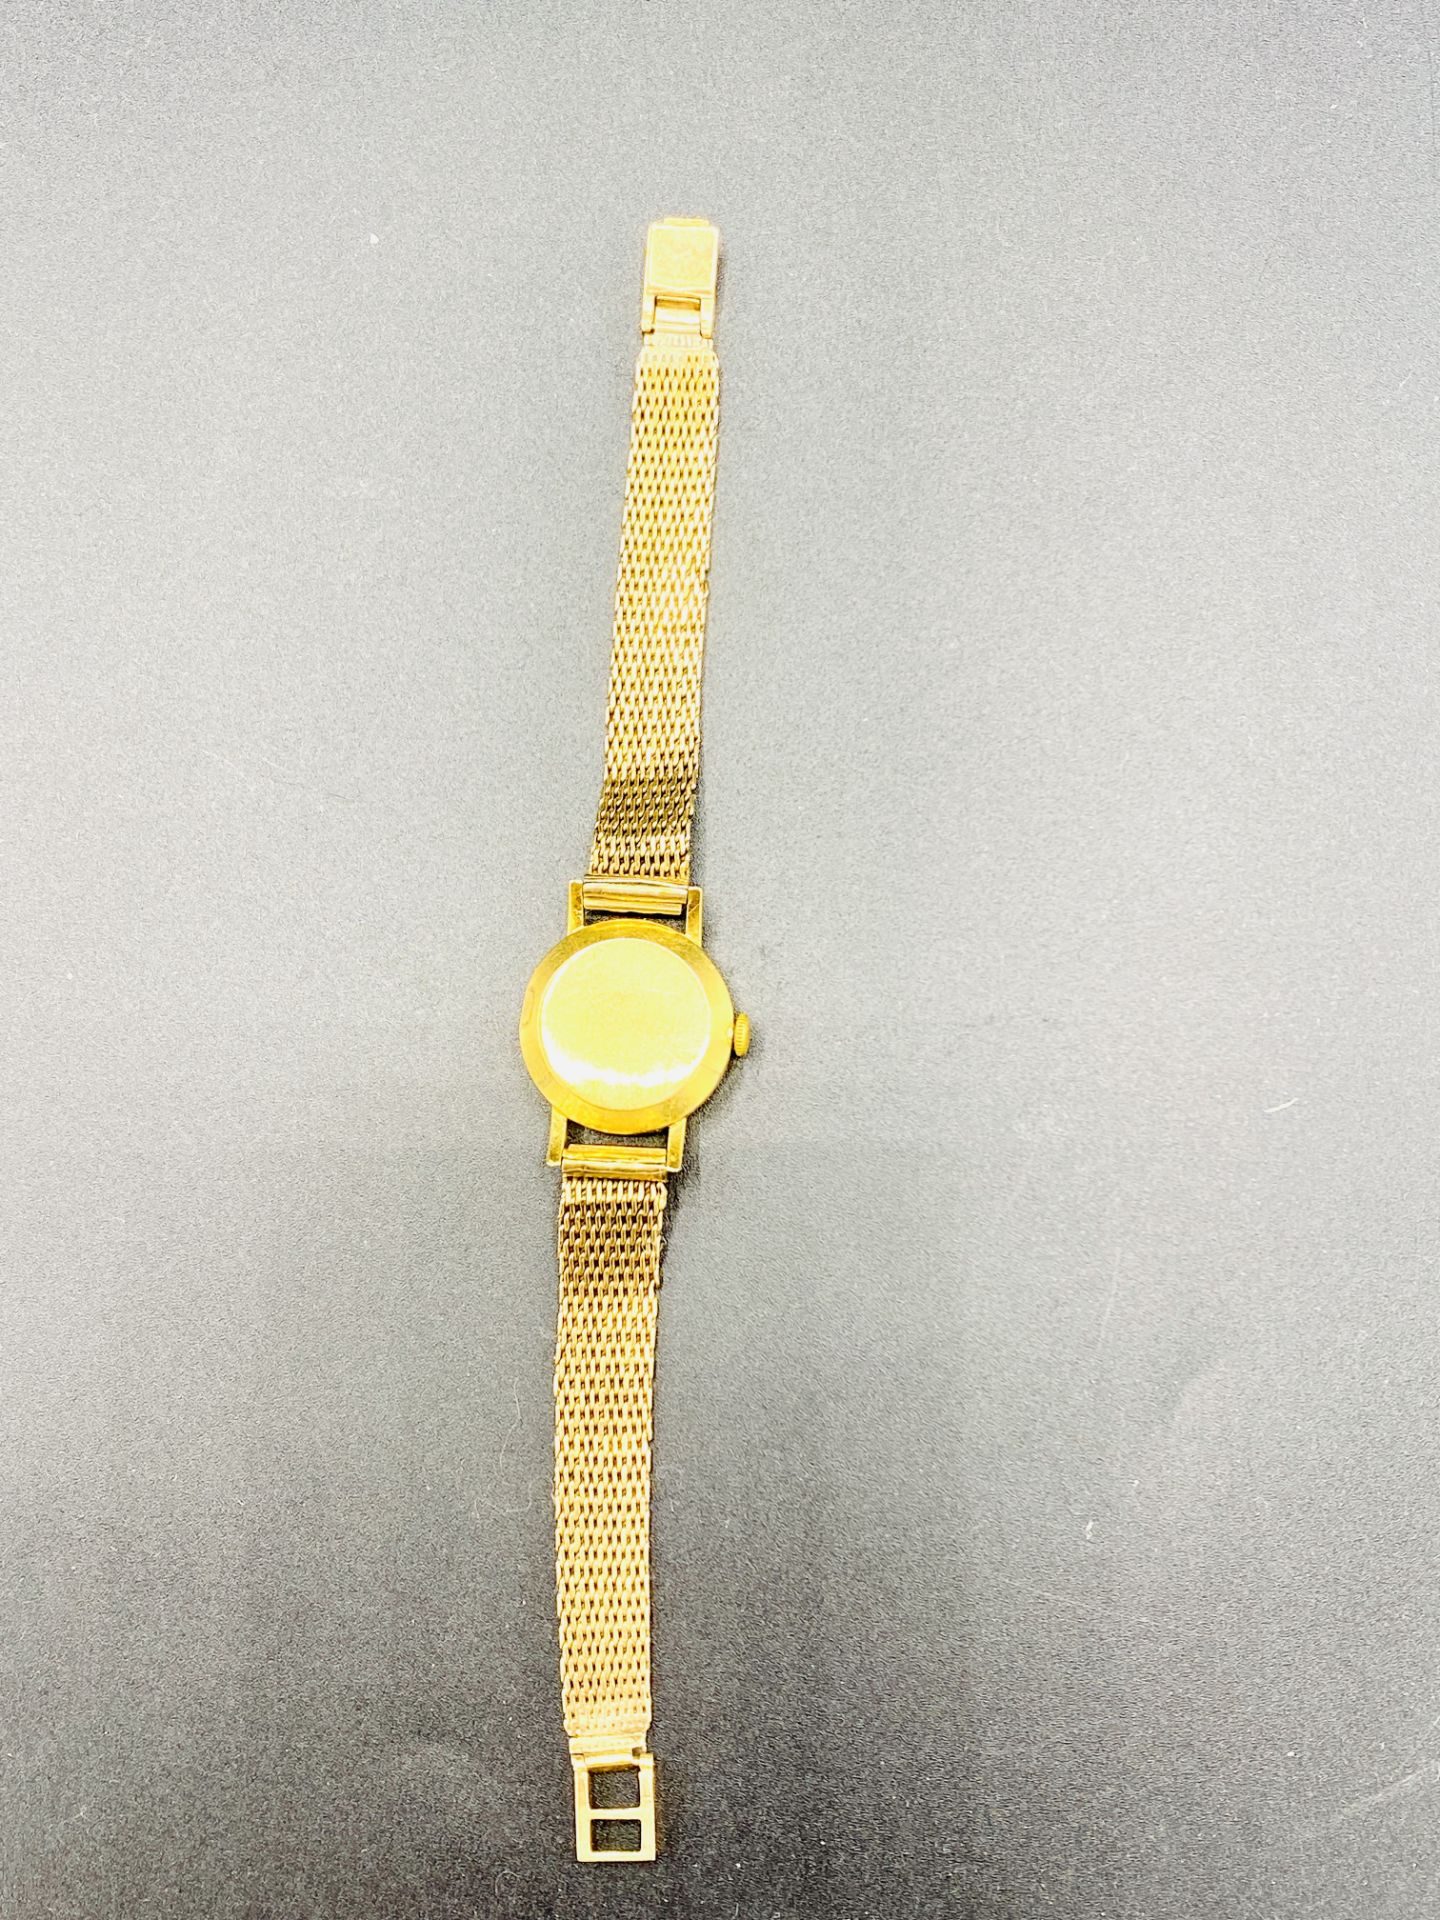 Longines 17 jewels manual wind ladies' wrist watch in 18ct gold case on 9ct gold strap - Image 4 of 6